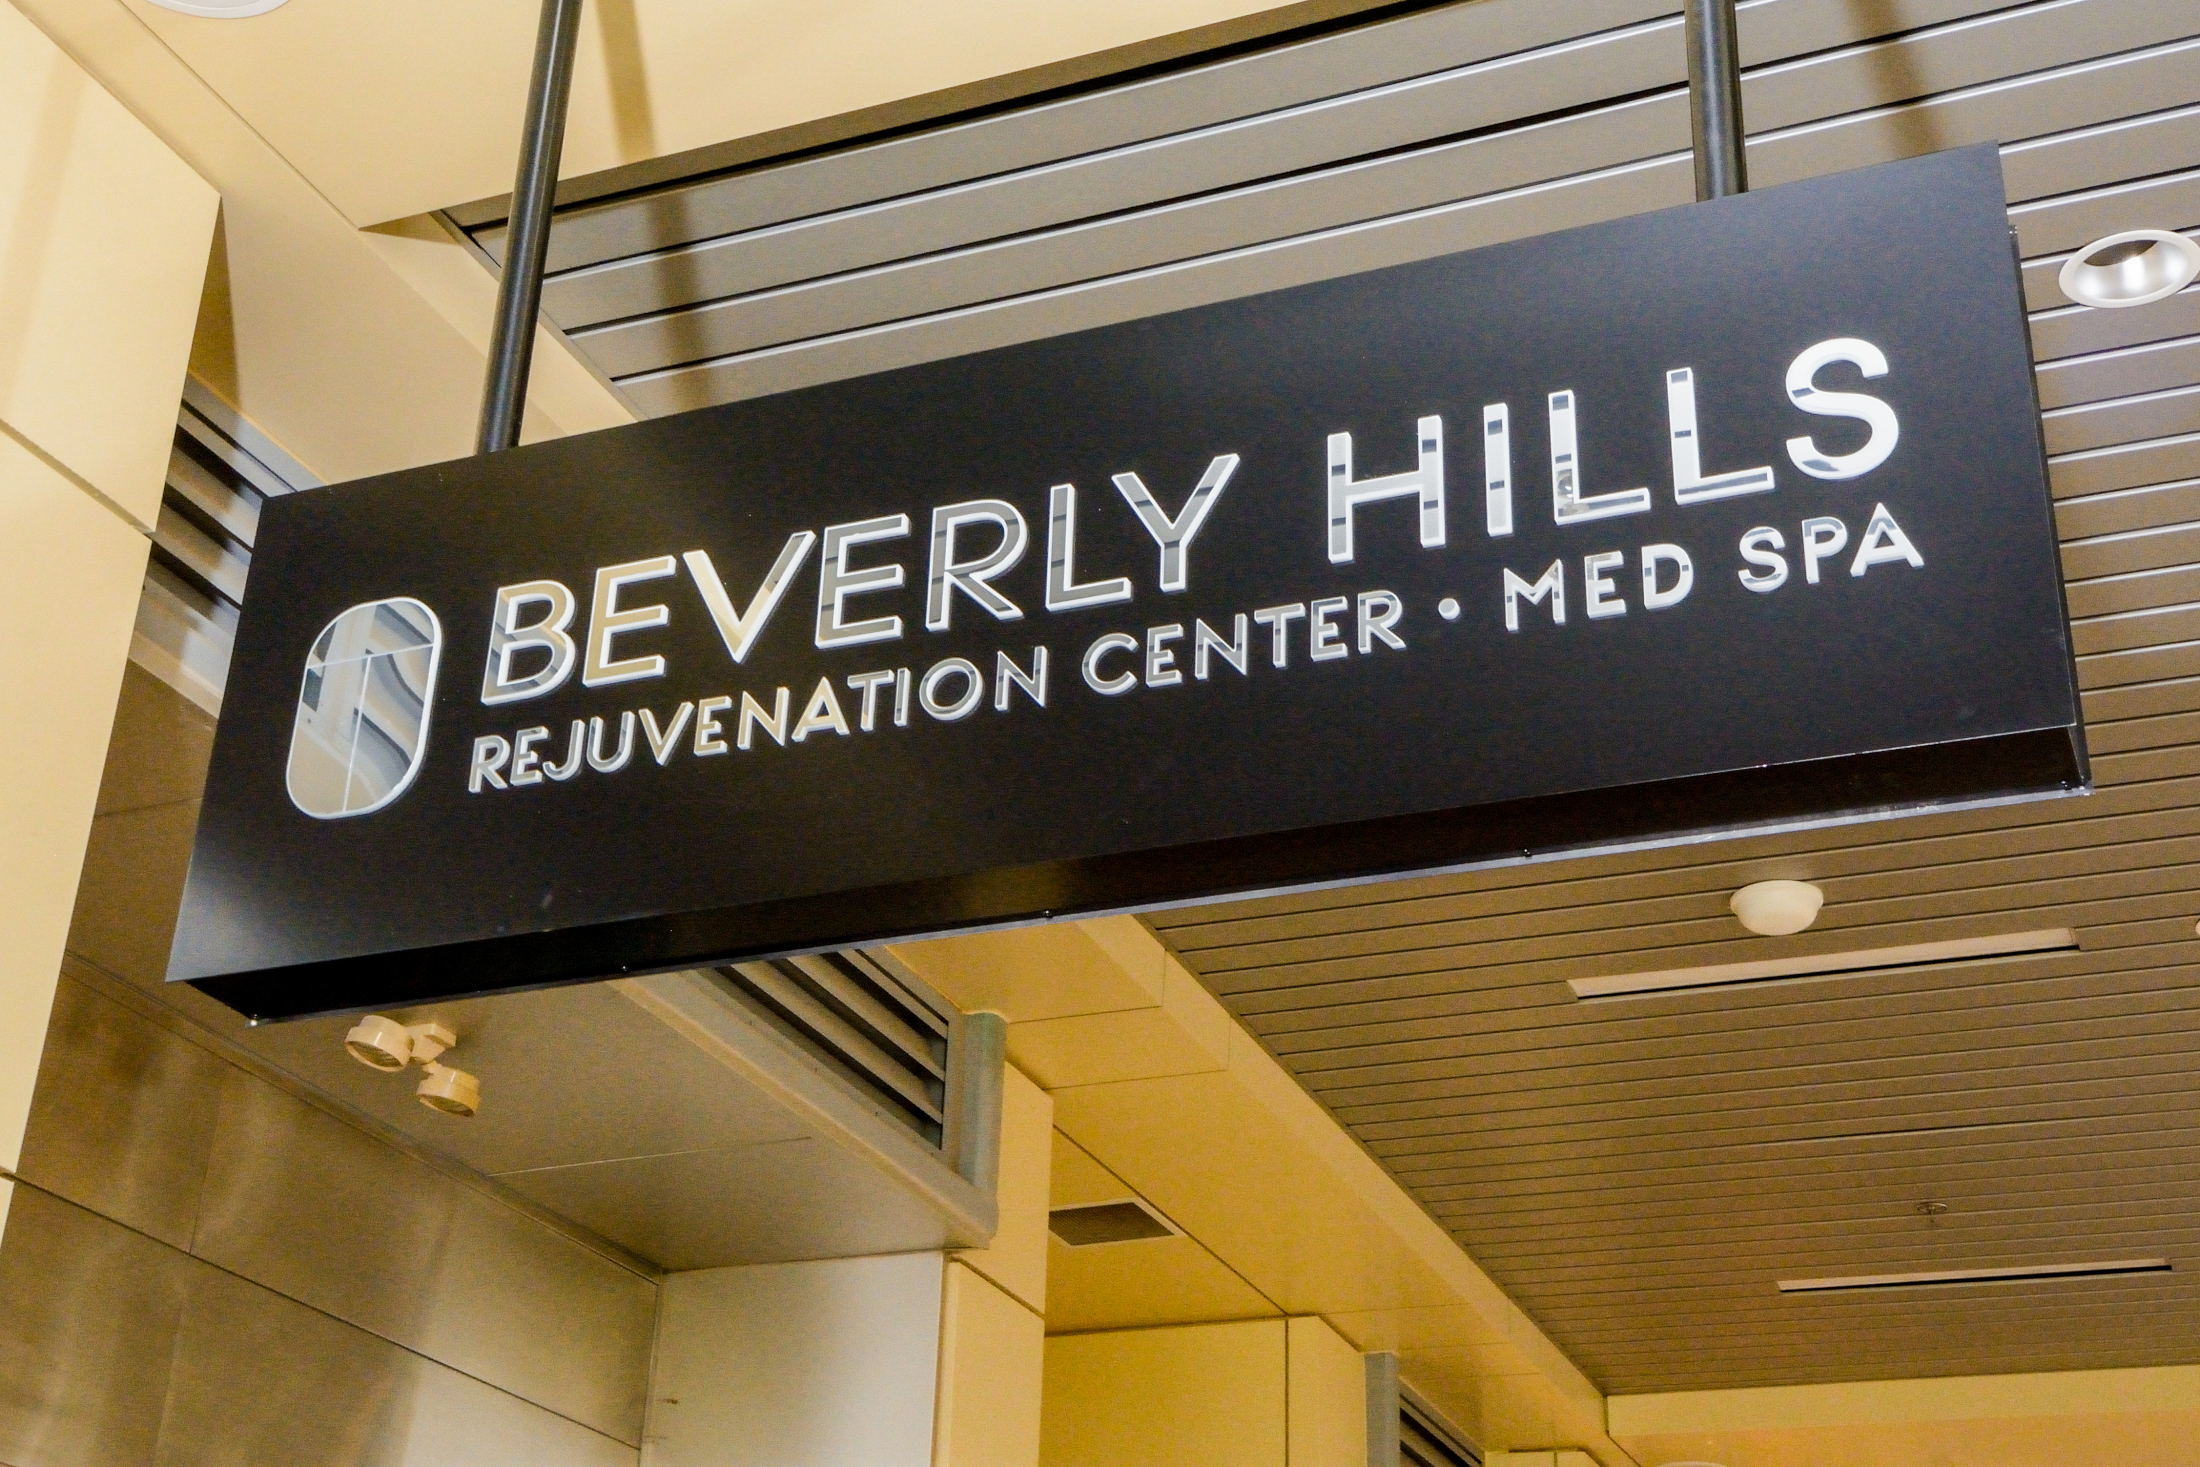 Located in Downtown Summerlin - Las Vegas Nevada, Beverly Hills Rejuvenation Center is a leader in services like Botox, facials, laser hair removal, PRP and many other aesthetics treatments.